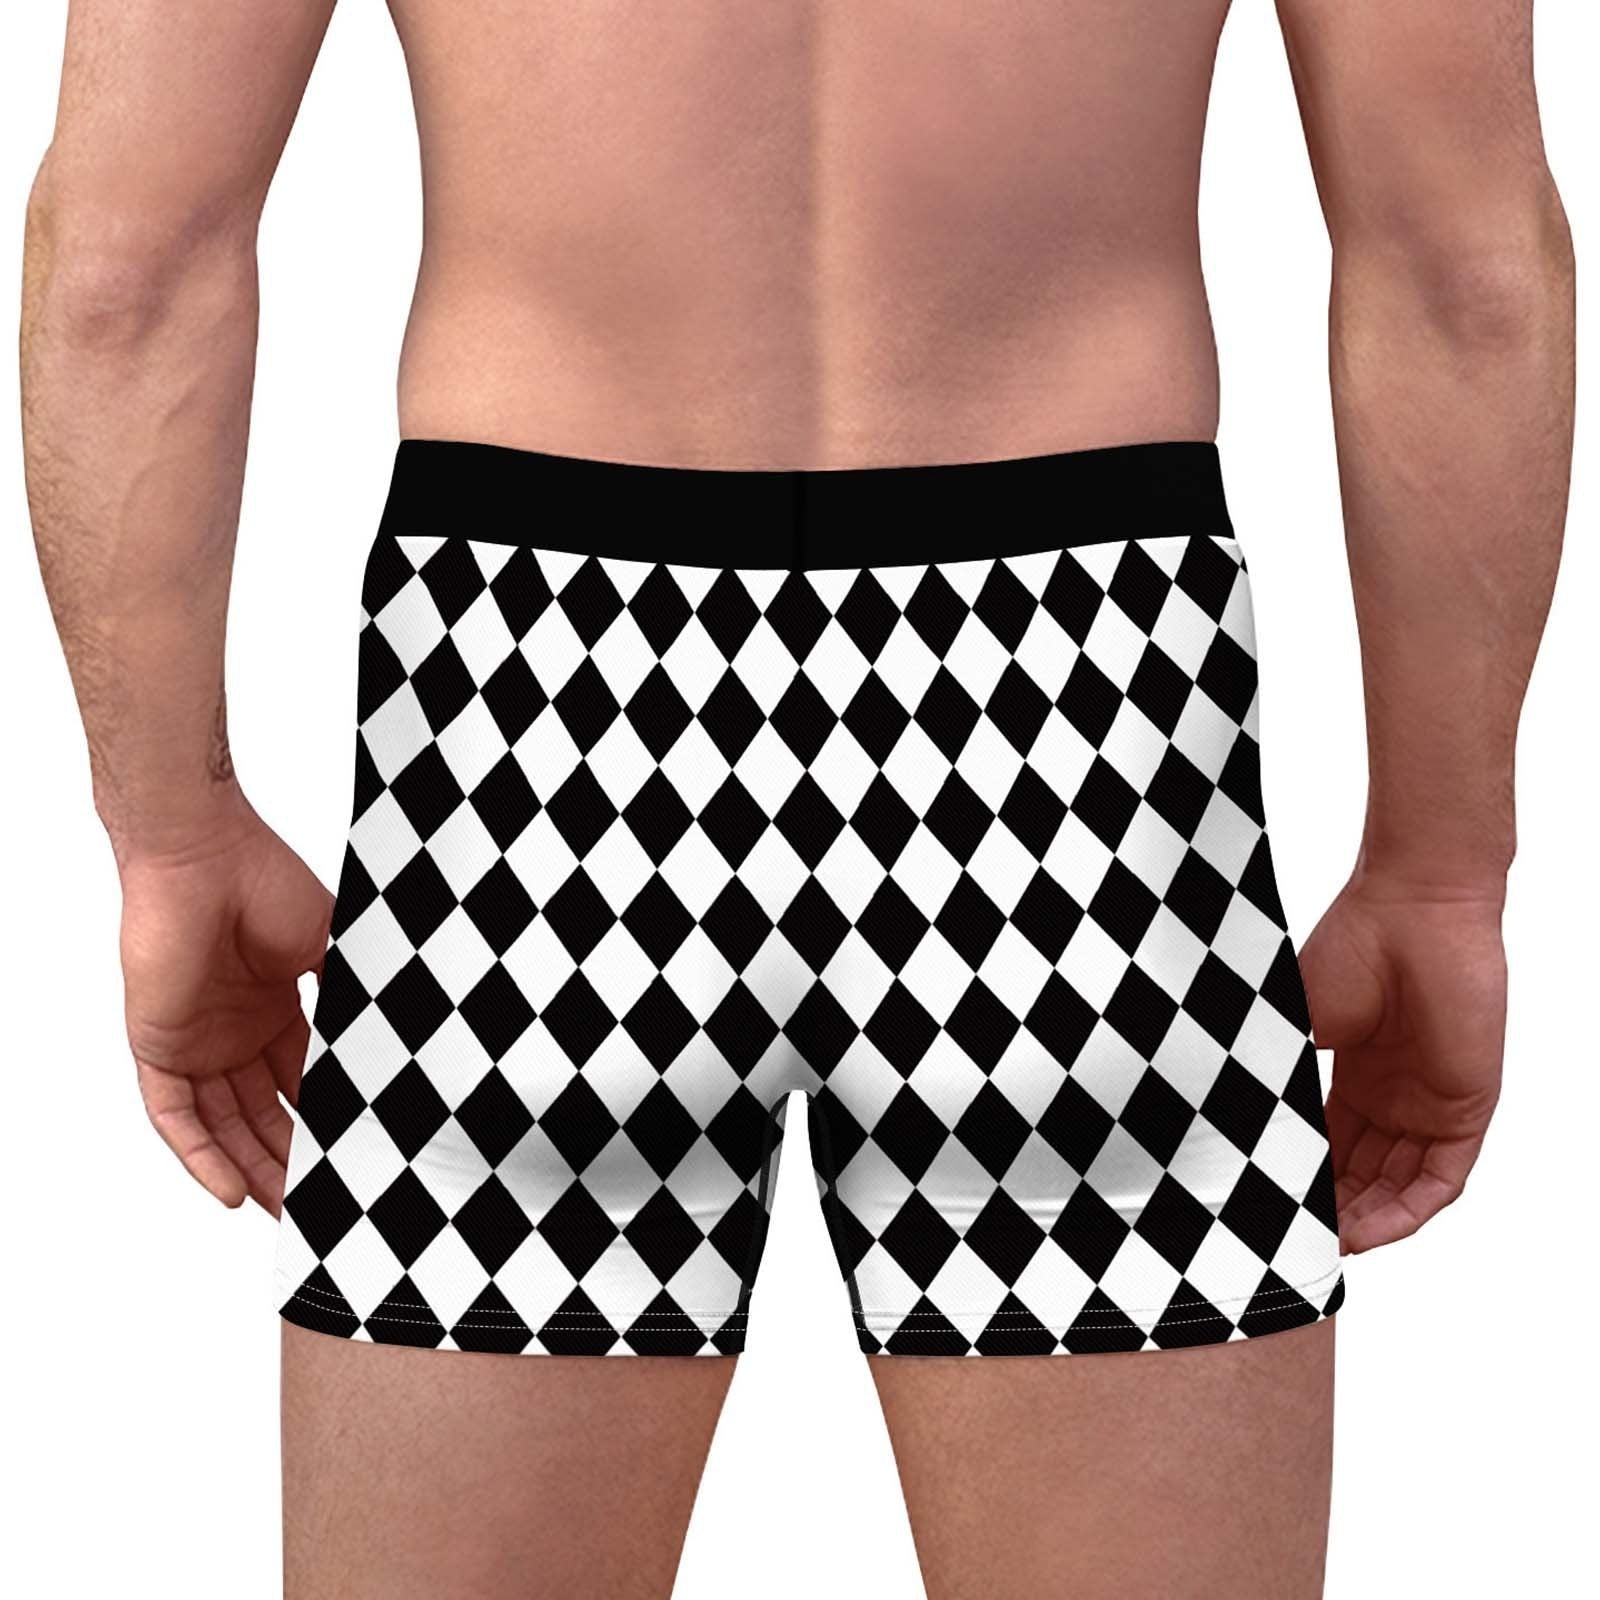 Boxers on sale